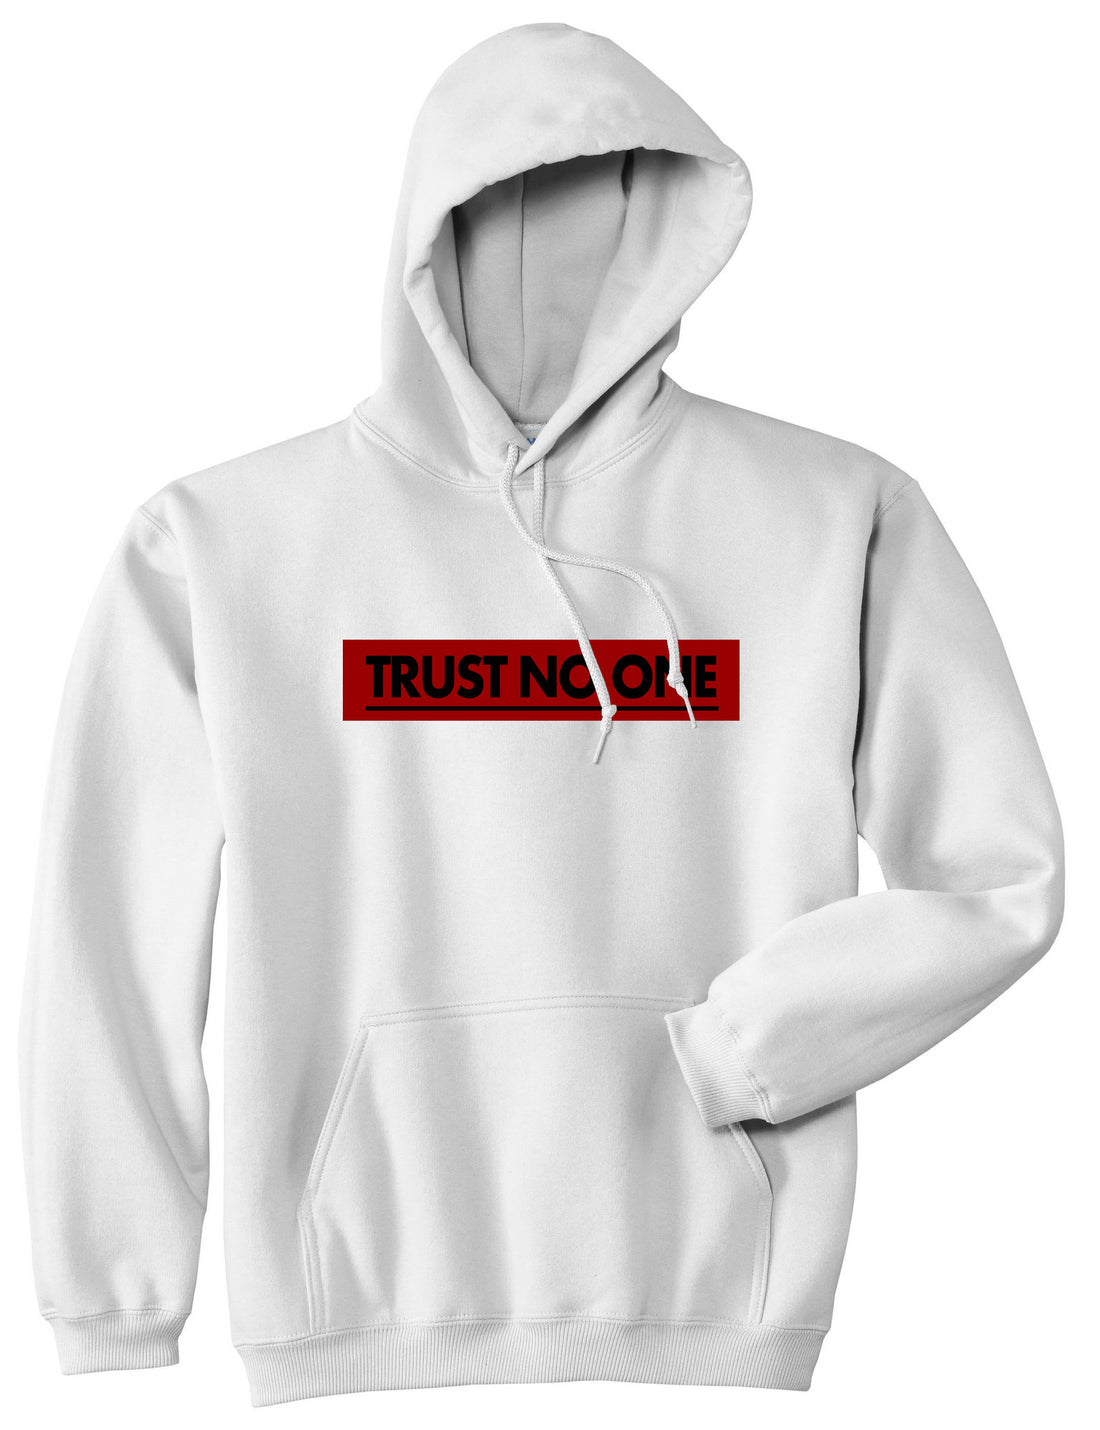 Trust No One Pullover Hoodie in White By Kings Of NY